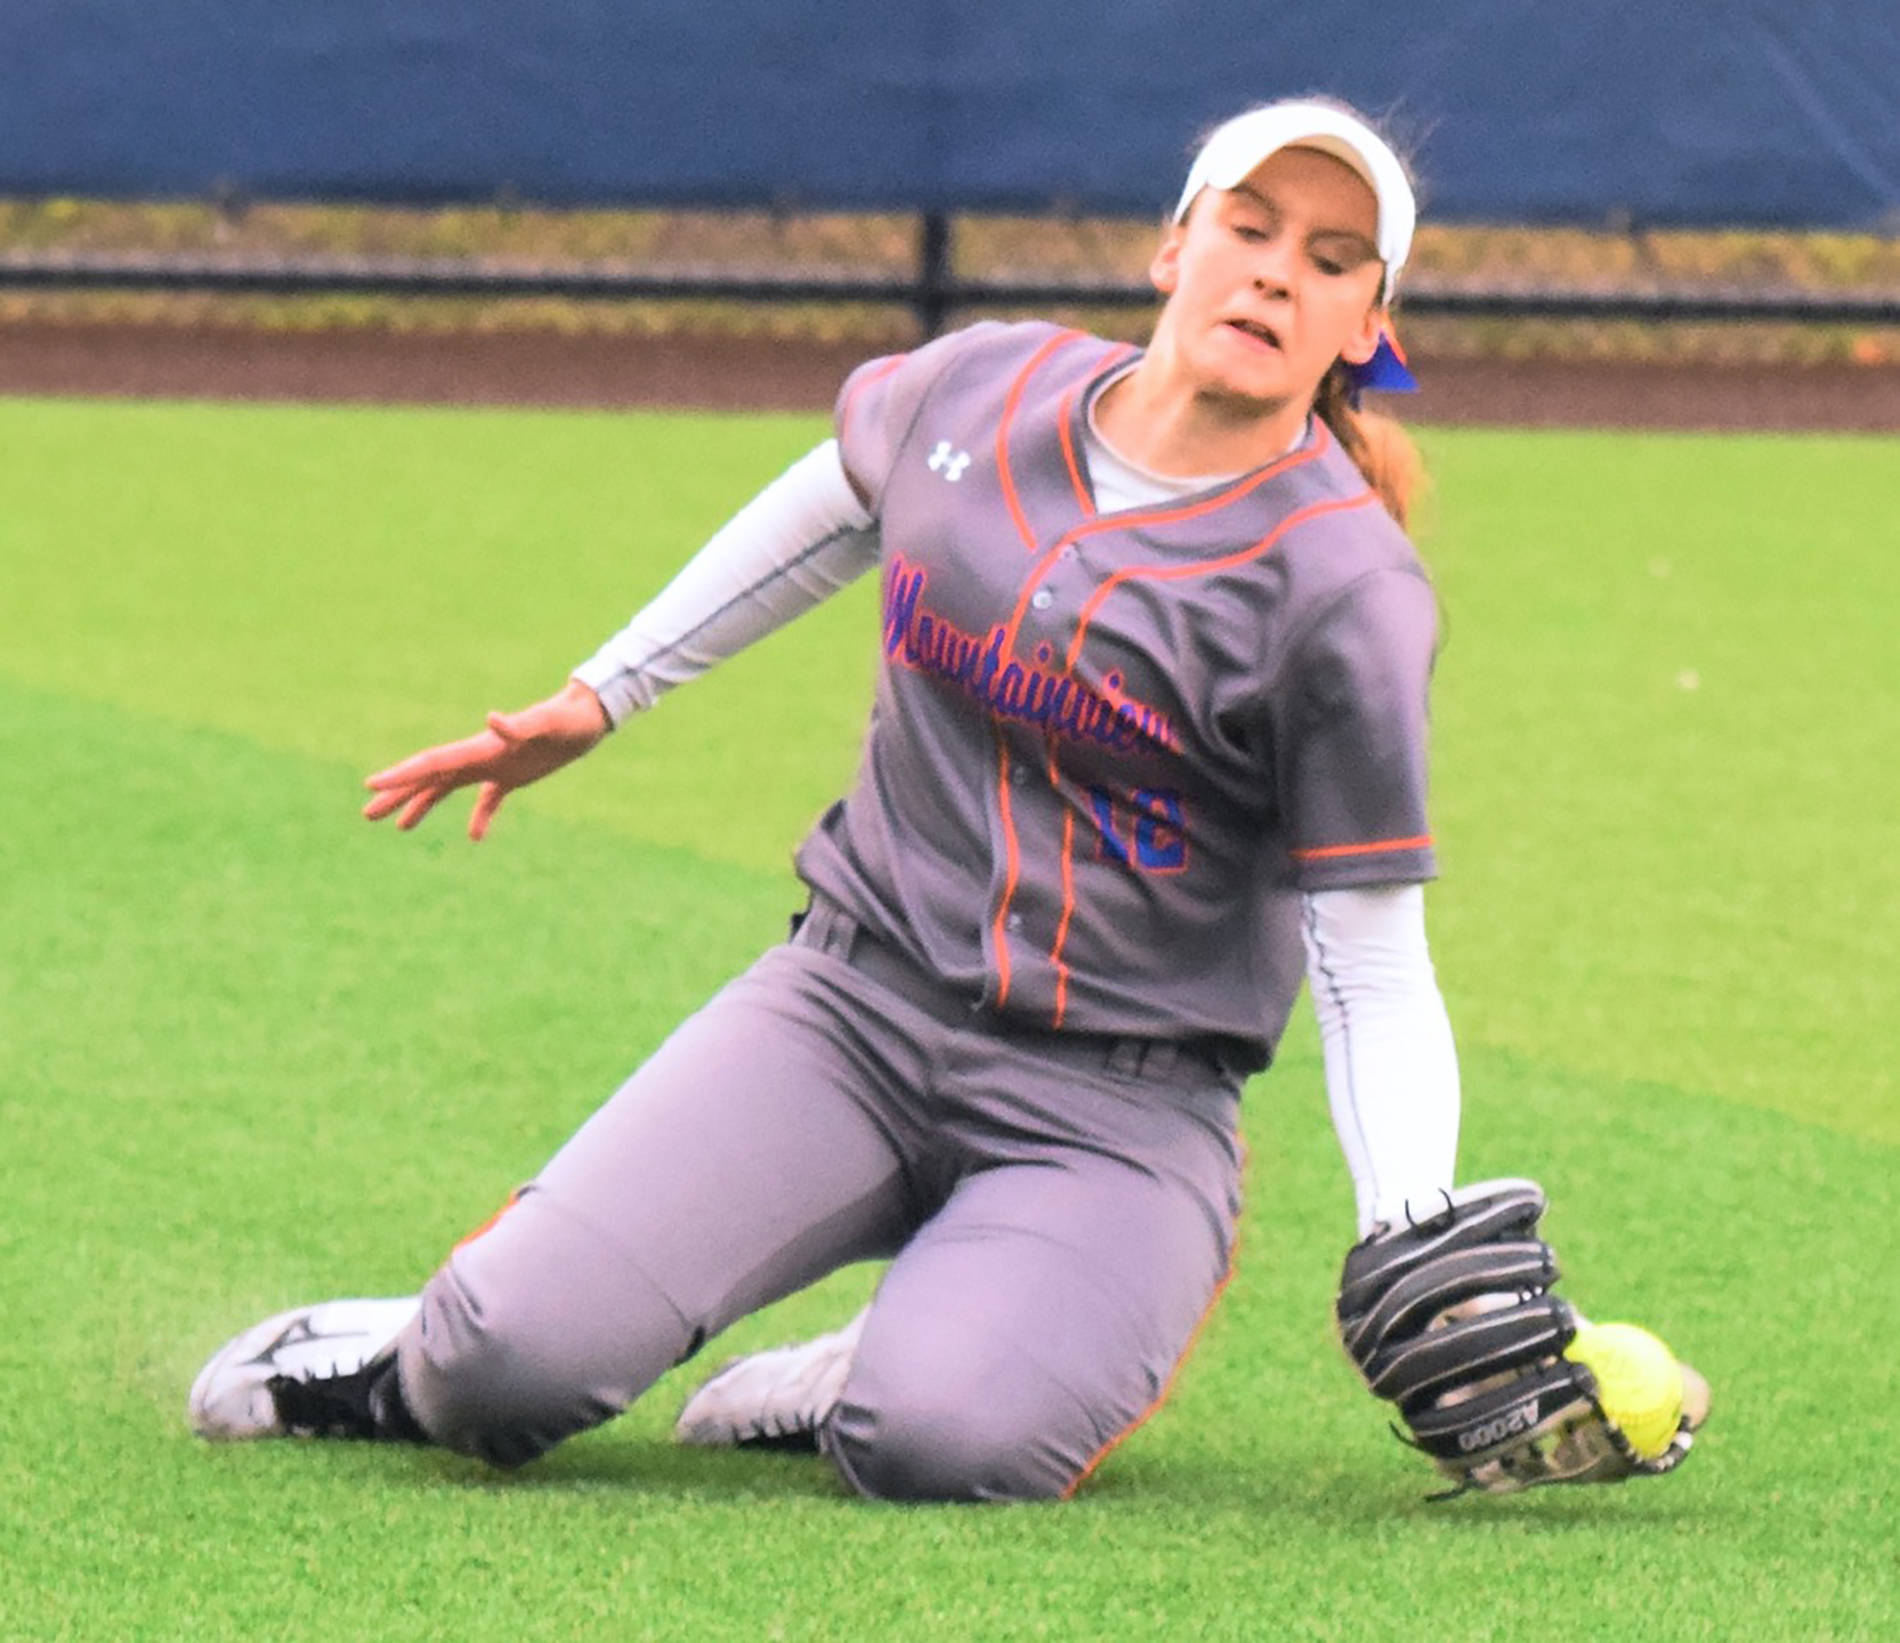 Auburn Mountainview’s Caitlyn Rhoades reaches to make a difficult catch in right field during the fifth inning of the NPSL title game Saturday at Tahoma High School. RACHEL CIAMPI, Auburn Reporter